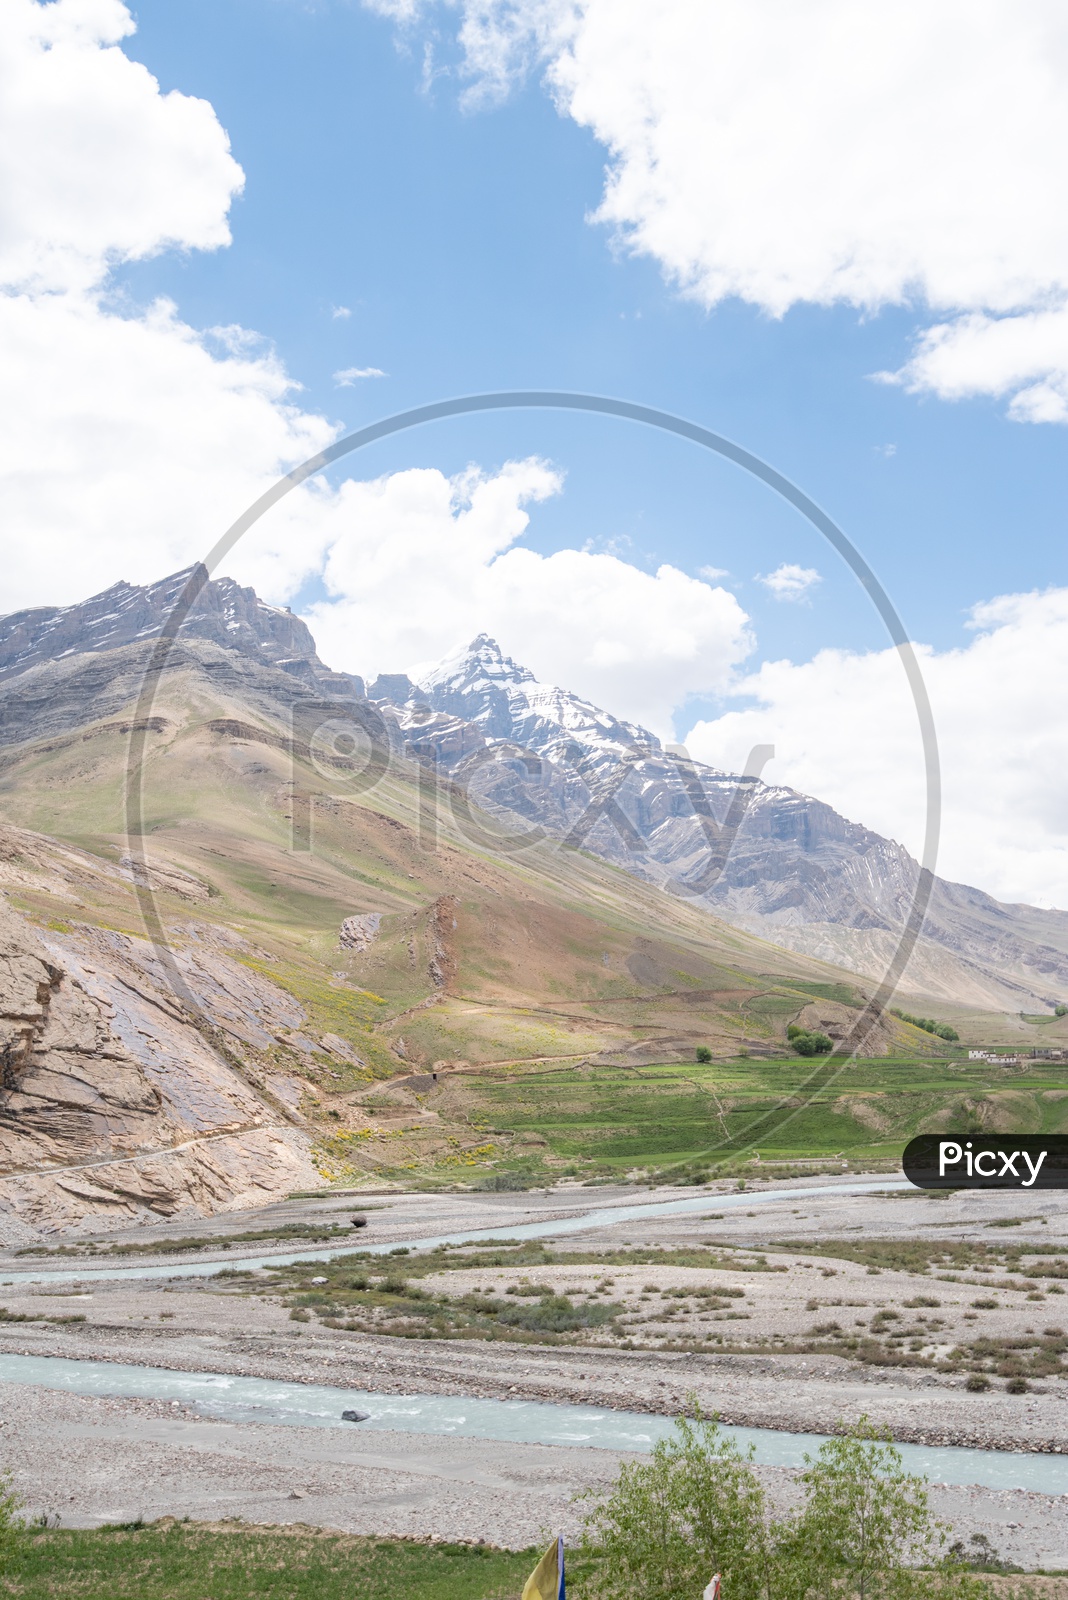 Spiti river with mountain peaks in the background in Spiti Valley